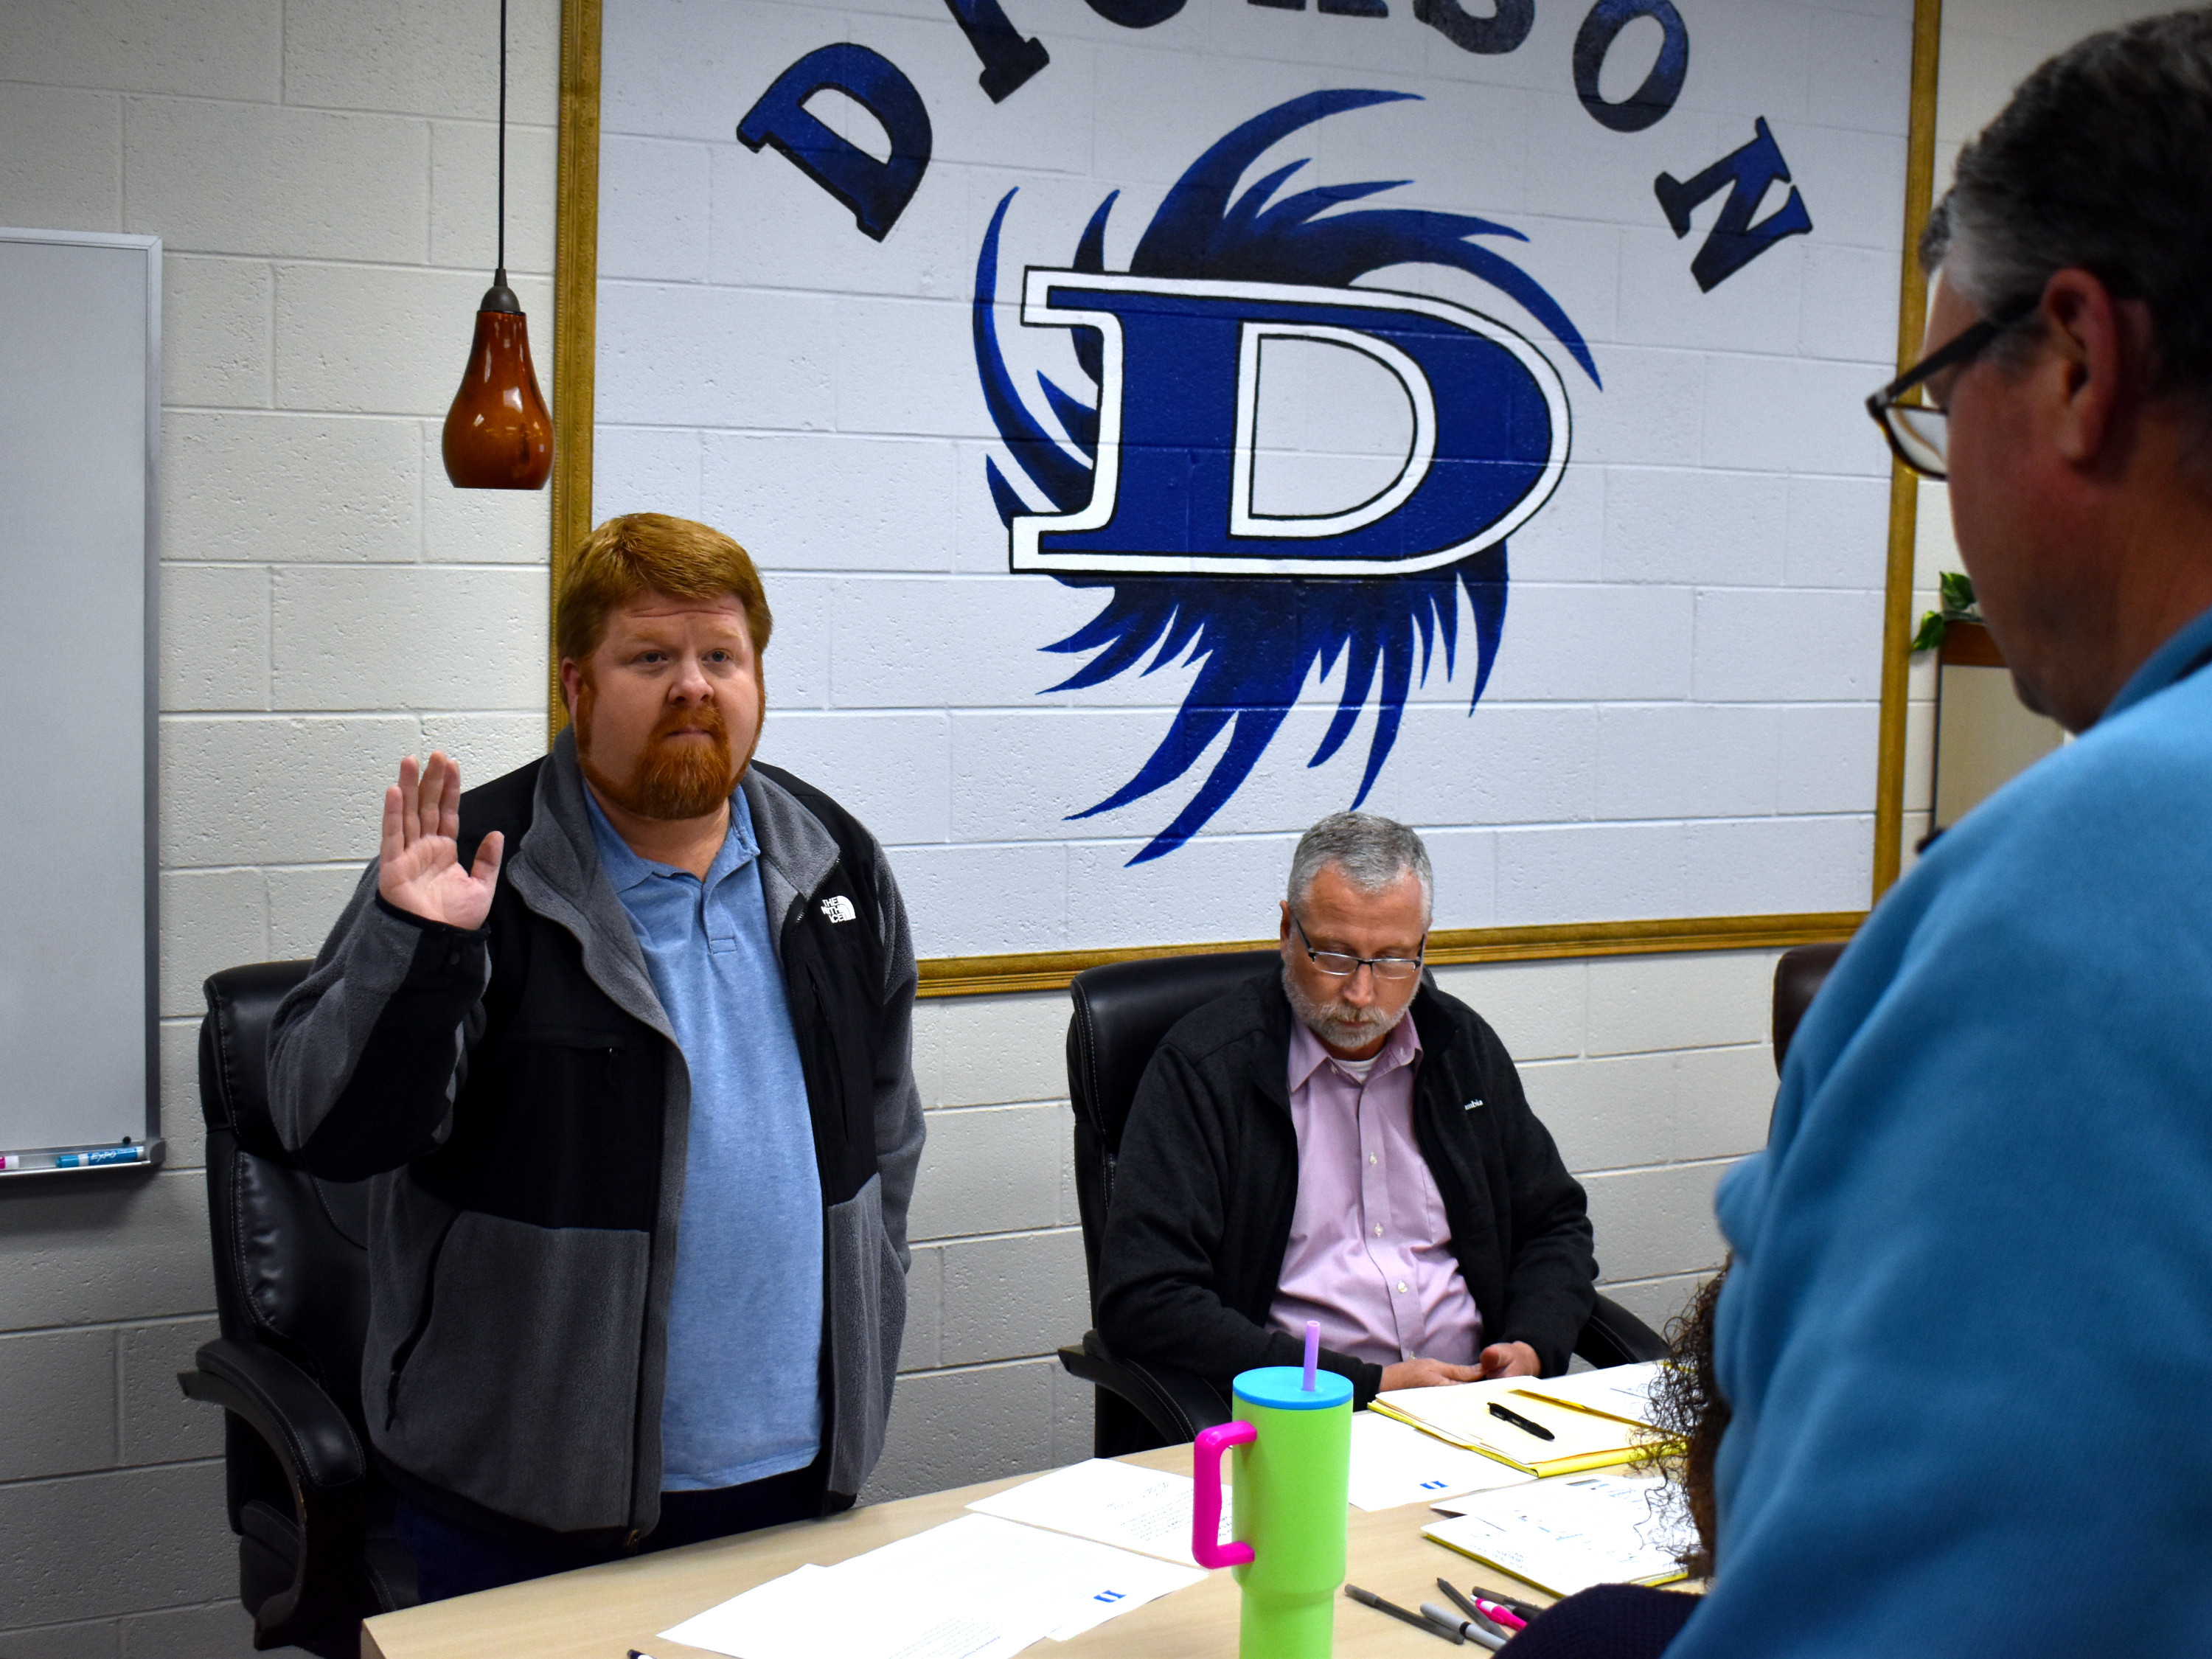 Jacob Tynes raises his right had to take the oath of office in front of fellow board members and school officials, including Superintendent Jamie Mitchell seated.